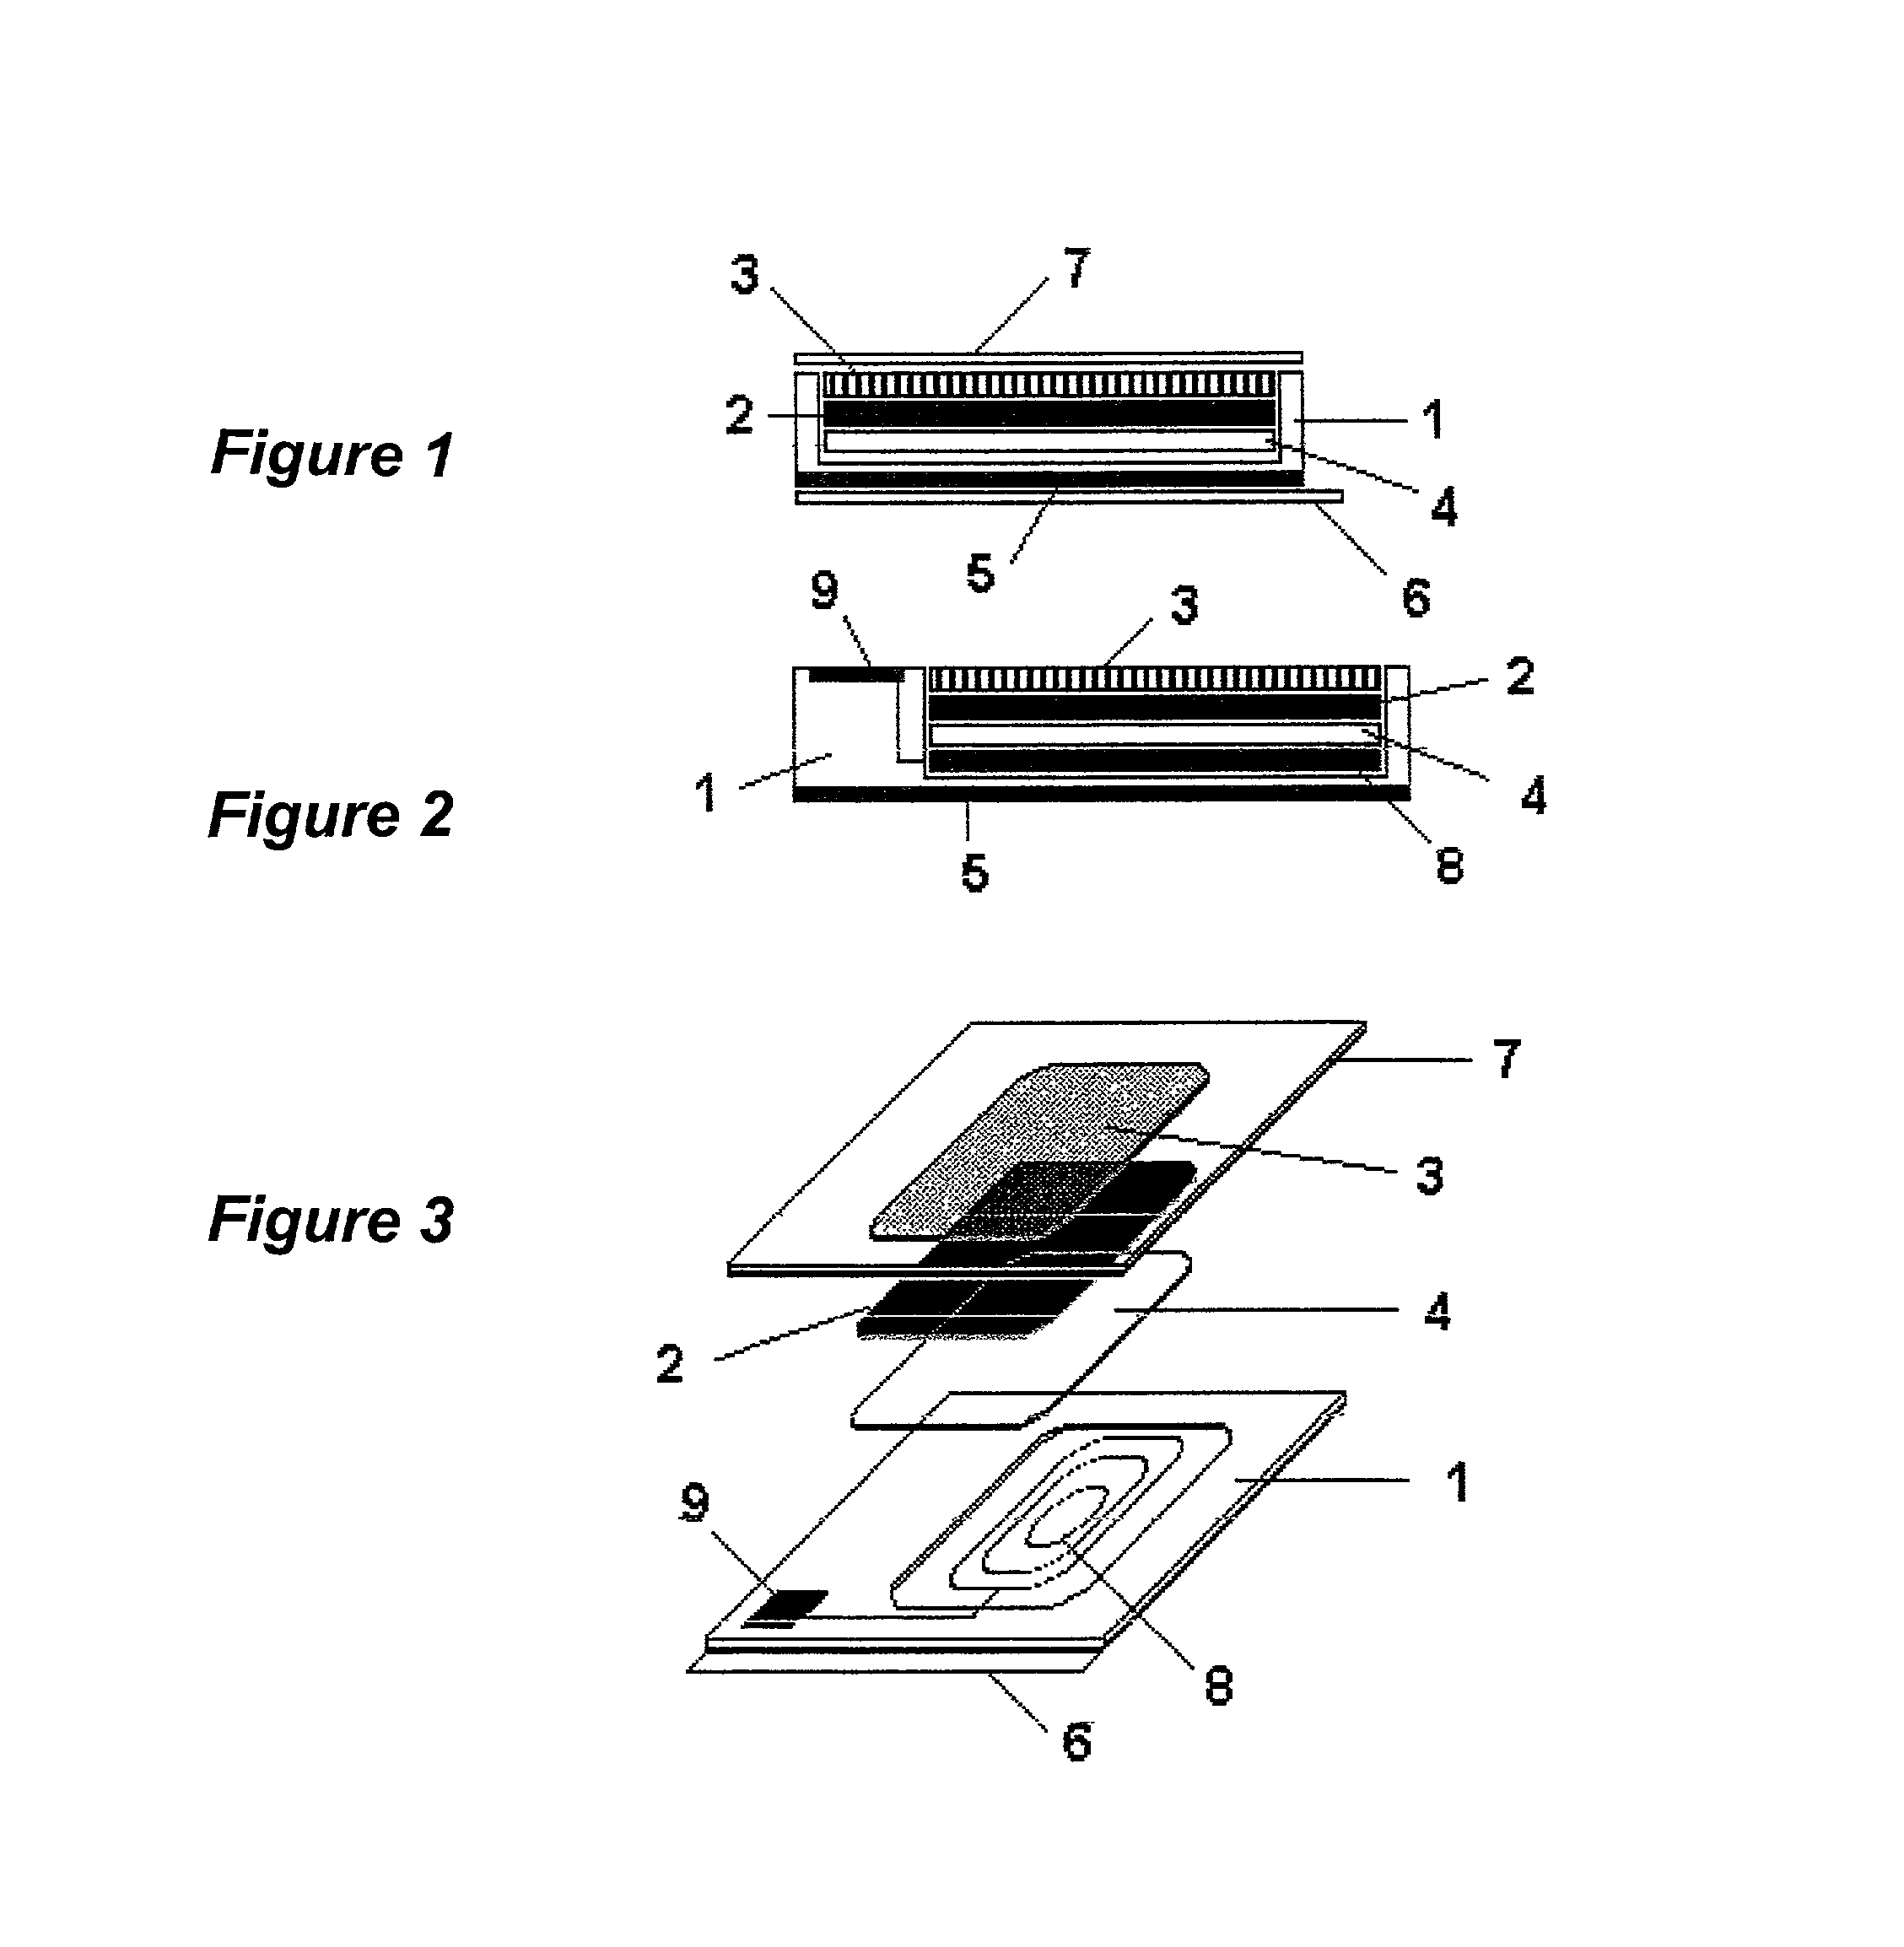 Chip systems for the controlled emission of substances having a chemosensory effect